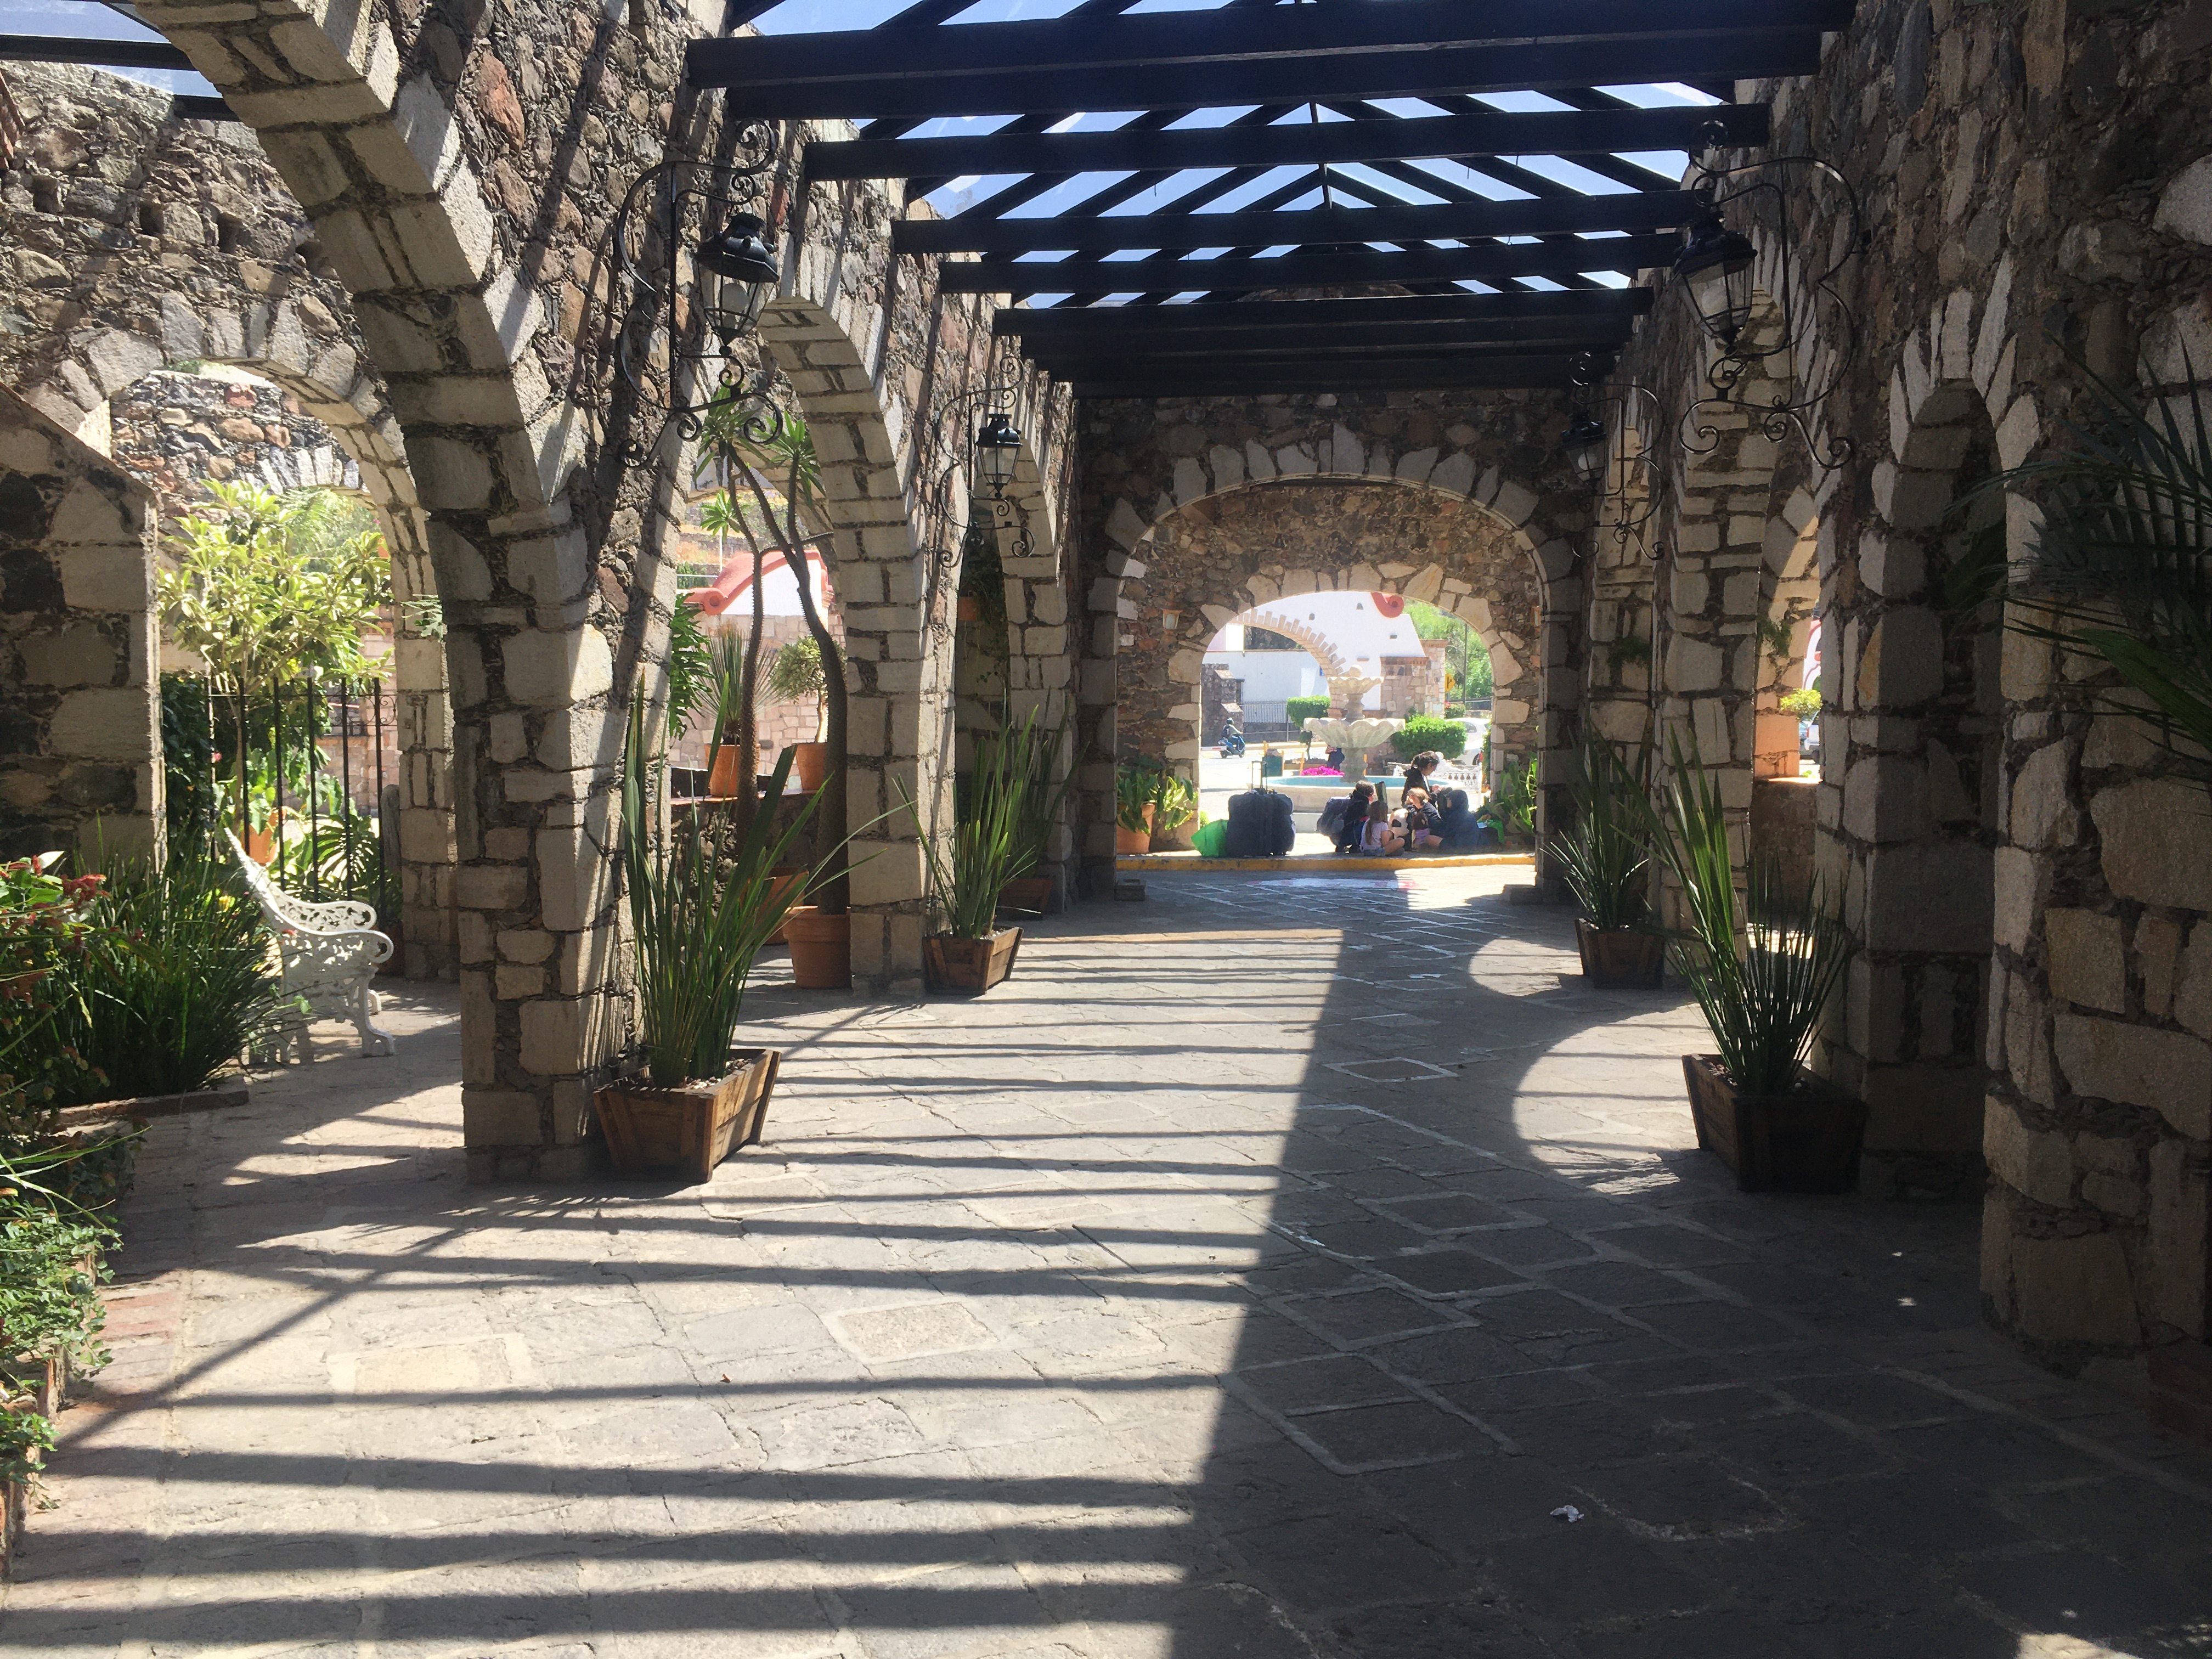 A walkway with stone arches along both sides. There are potted plants, a white wrought-iron bench, and a glimpse of a garden beyond the fence on one side. At the end of the corridor there are two arches, one beyond the other, and a pile of bags and kids sitting at the curb.